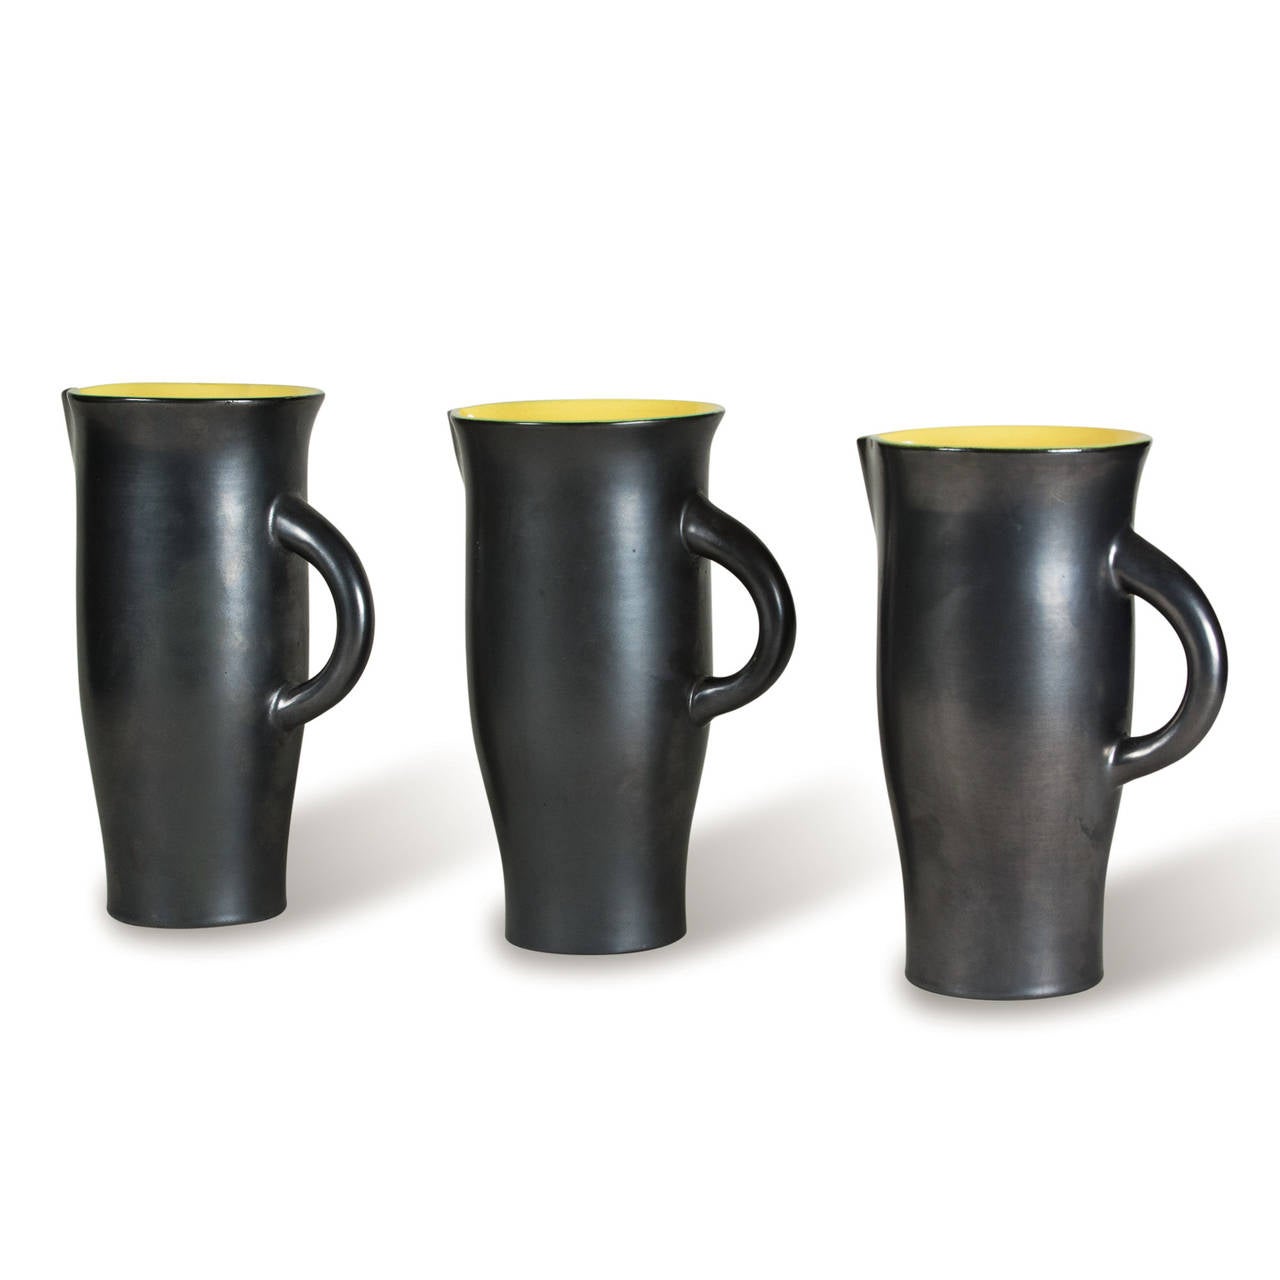 Set of three black glazed ceramic pitchers, the interiors glazed bright yellow, of slightly different for, in a lustre finish, by Elchinger, French early 1960s. Height of tallest 11 1/2 in, diameter of largest (excluding handle) 5 3/8 in. Signed to